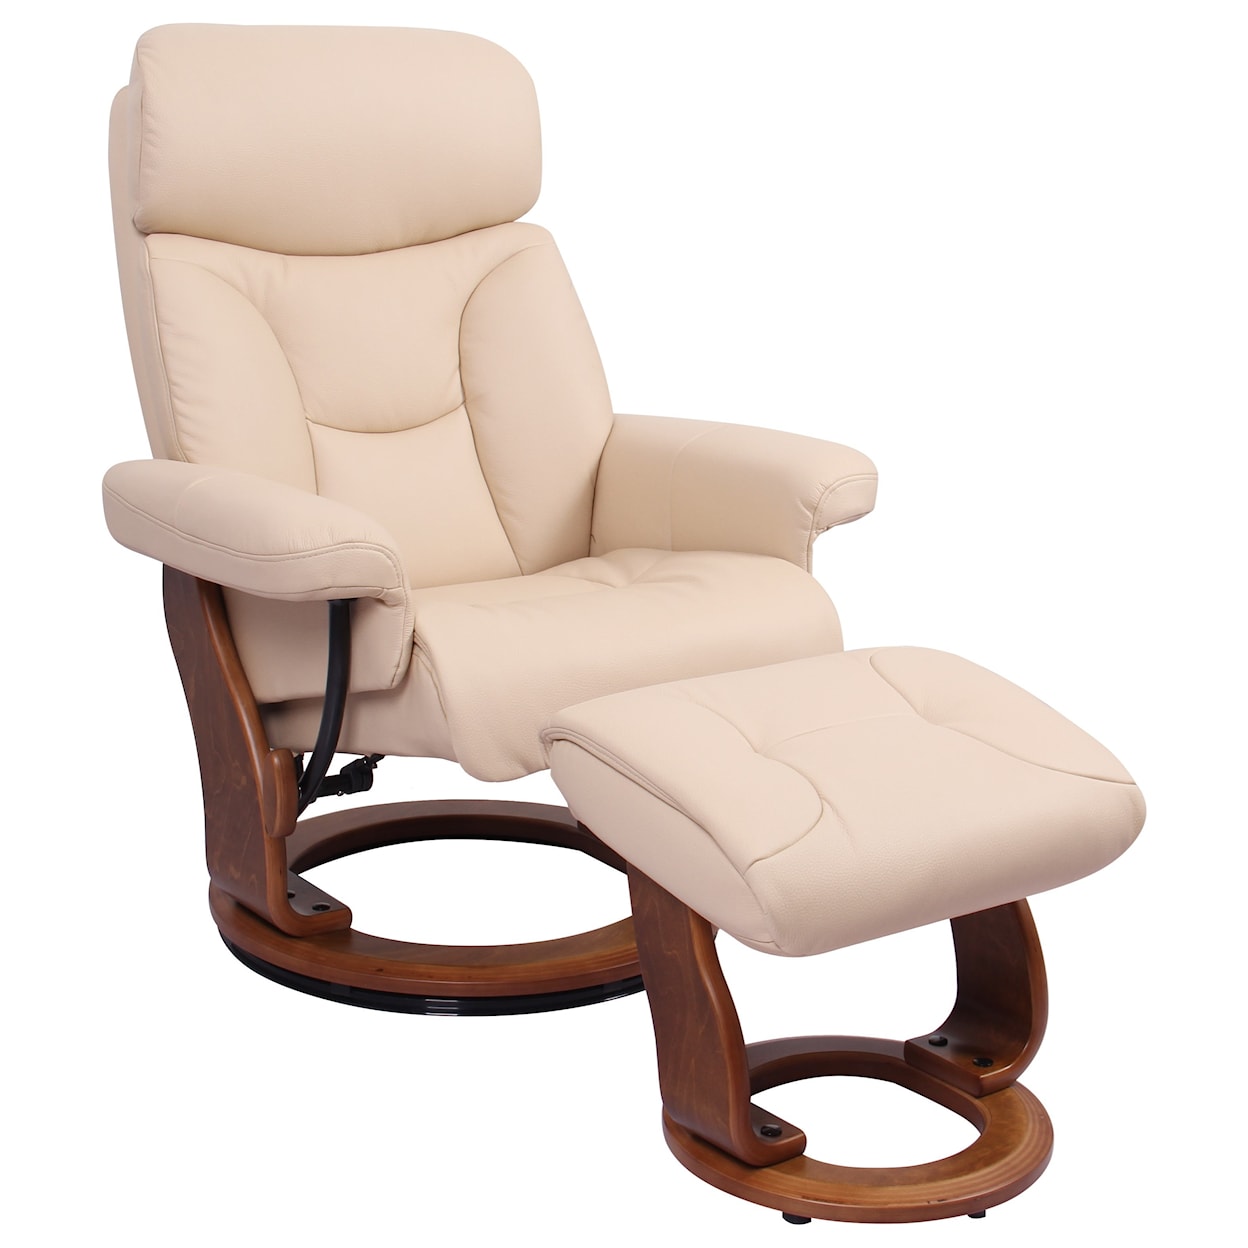 Benchmaster Emmie II Reclining Chair and Ottoman